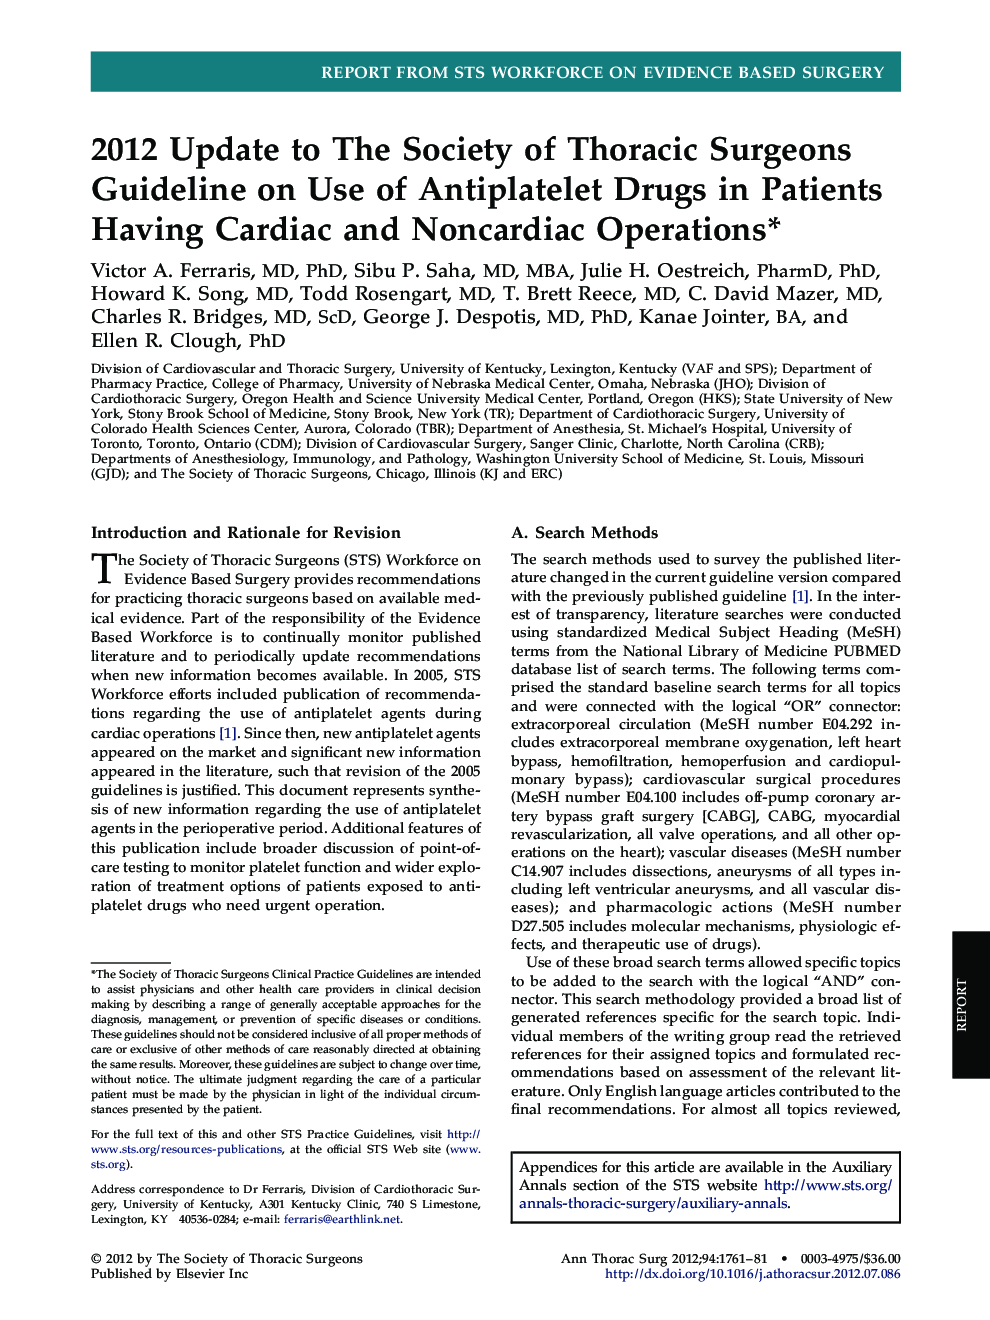 2012 Update to The Society of Thoracic Surgeons Guideline on Use of Antiplatelet Drugs in Patients Having Cardiac and Noncardiac Operations